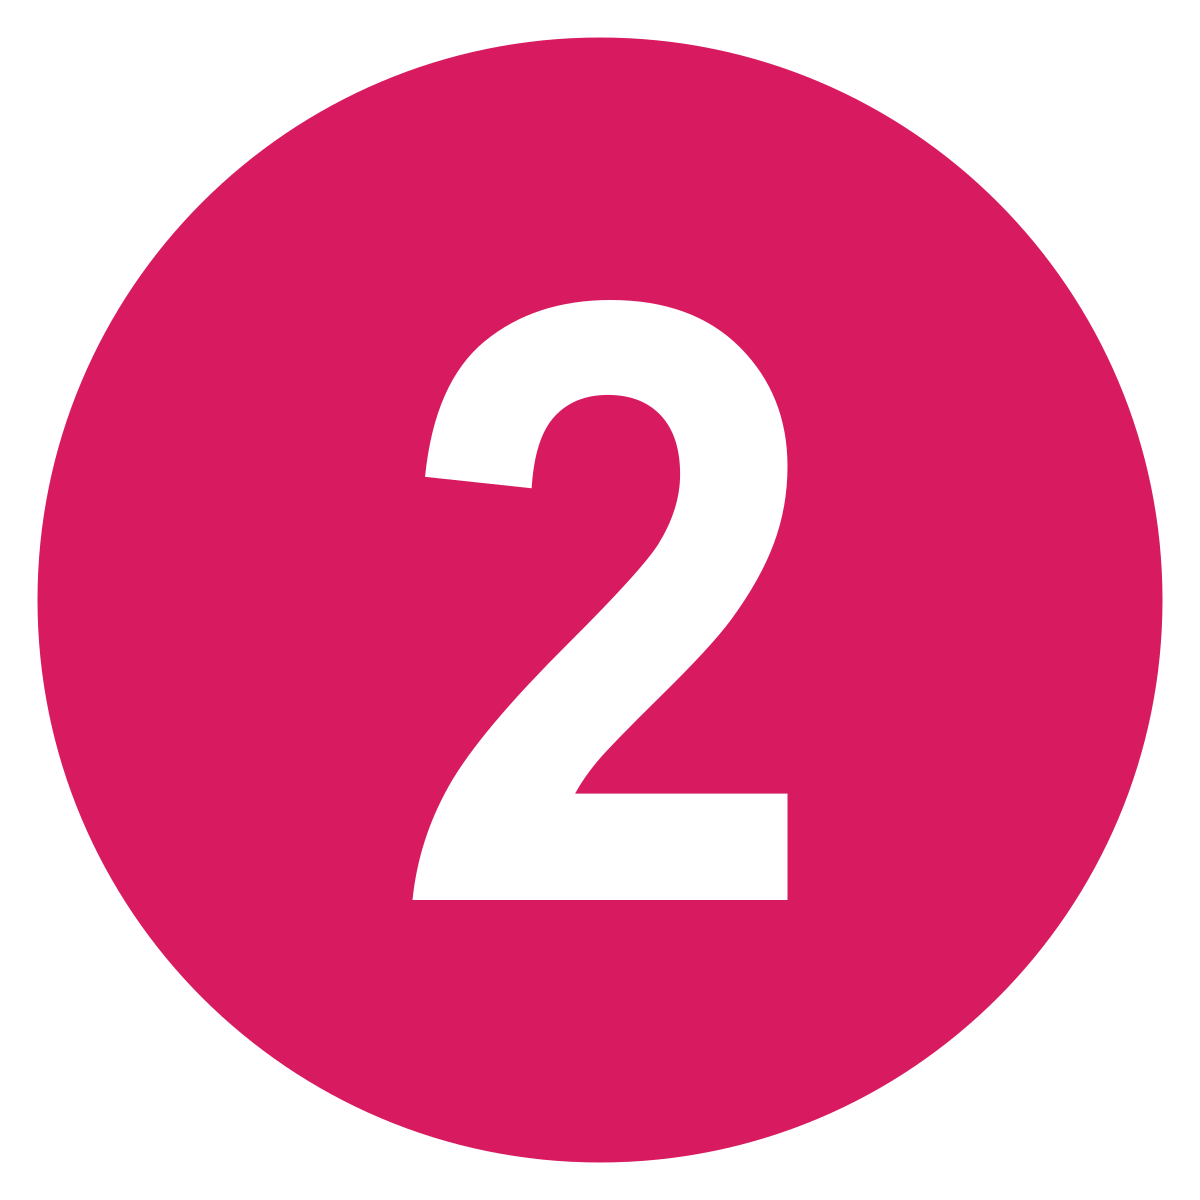 File:Eo circle pink number-2.svg - Wikimedia Commons